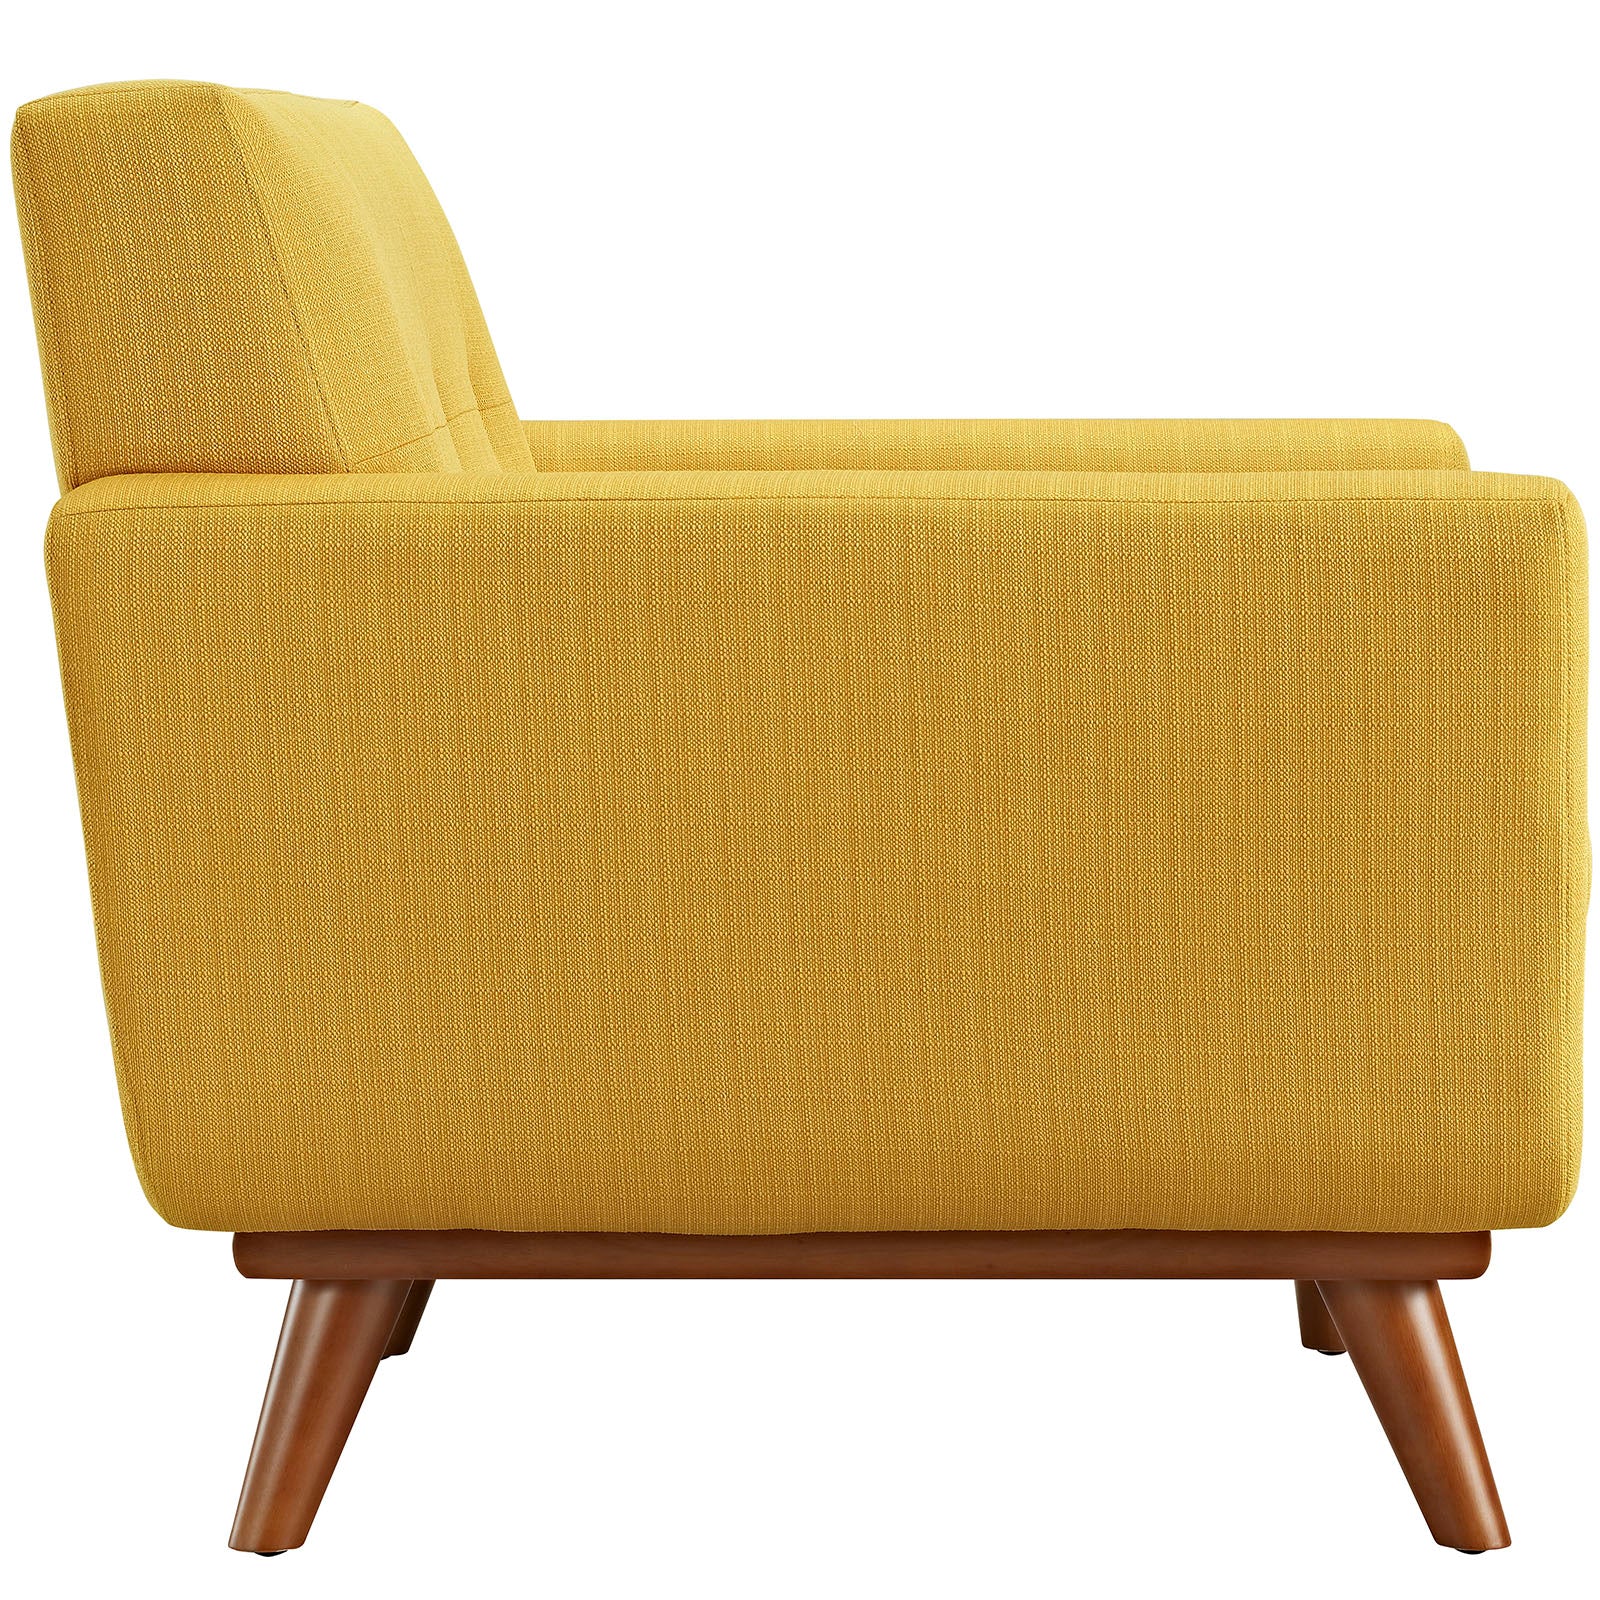 Engage Upholstered Fabric Armchair - East Shore Modern Home Furnishings